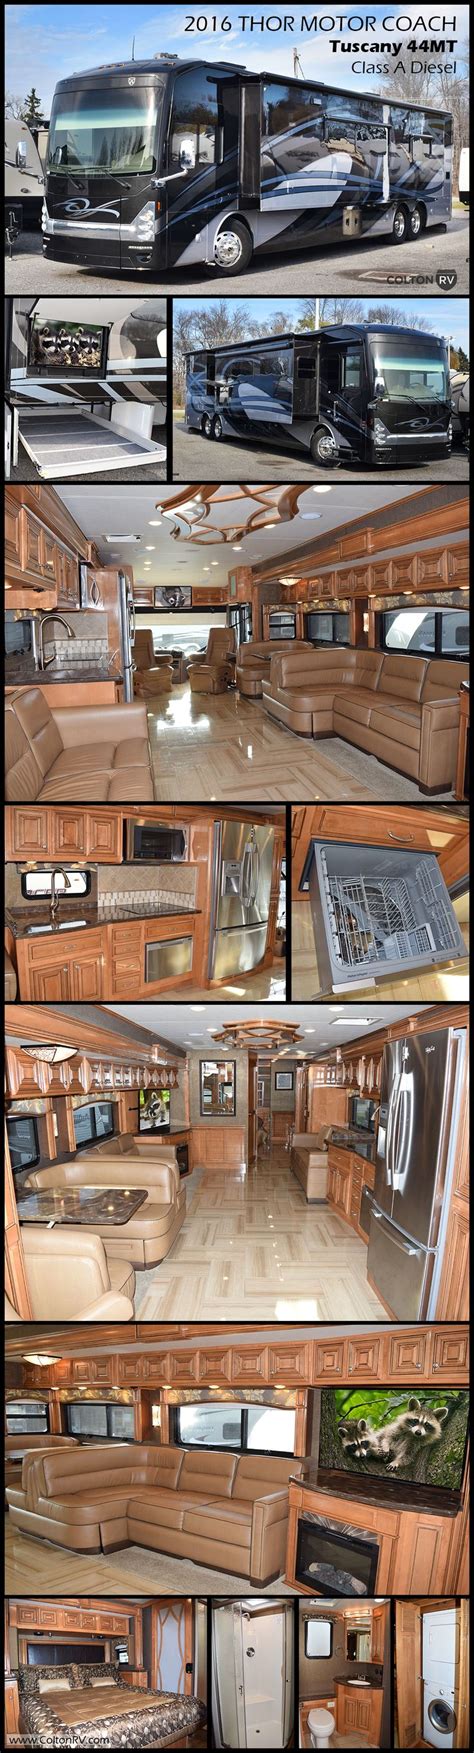 2016 Thor Motor Coach Tuscany 44mt Class A Diesel Pusher This Luxury